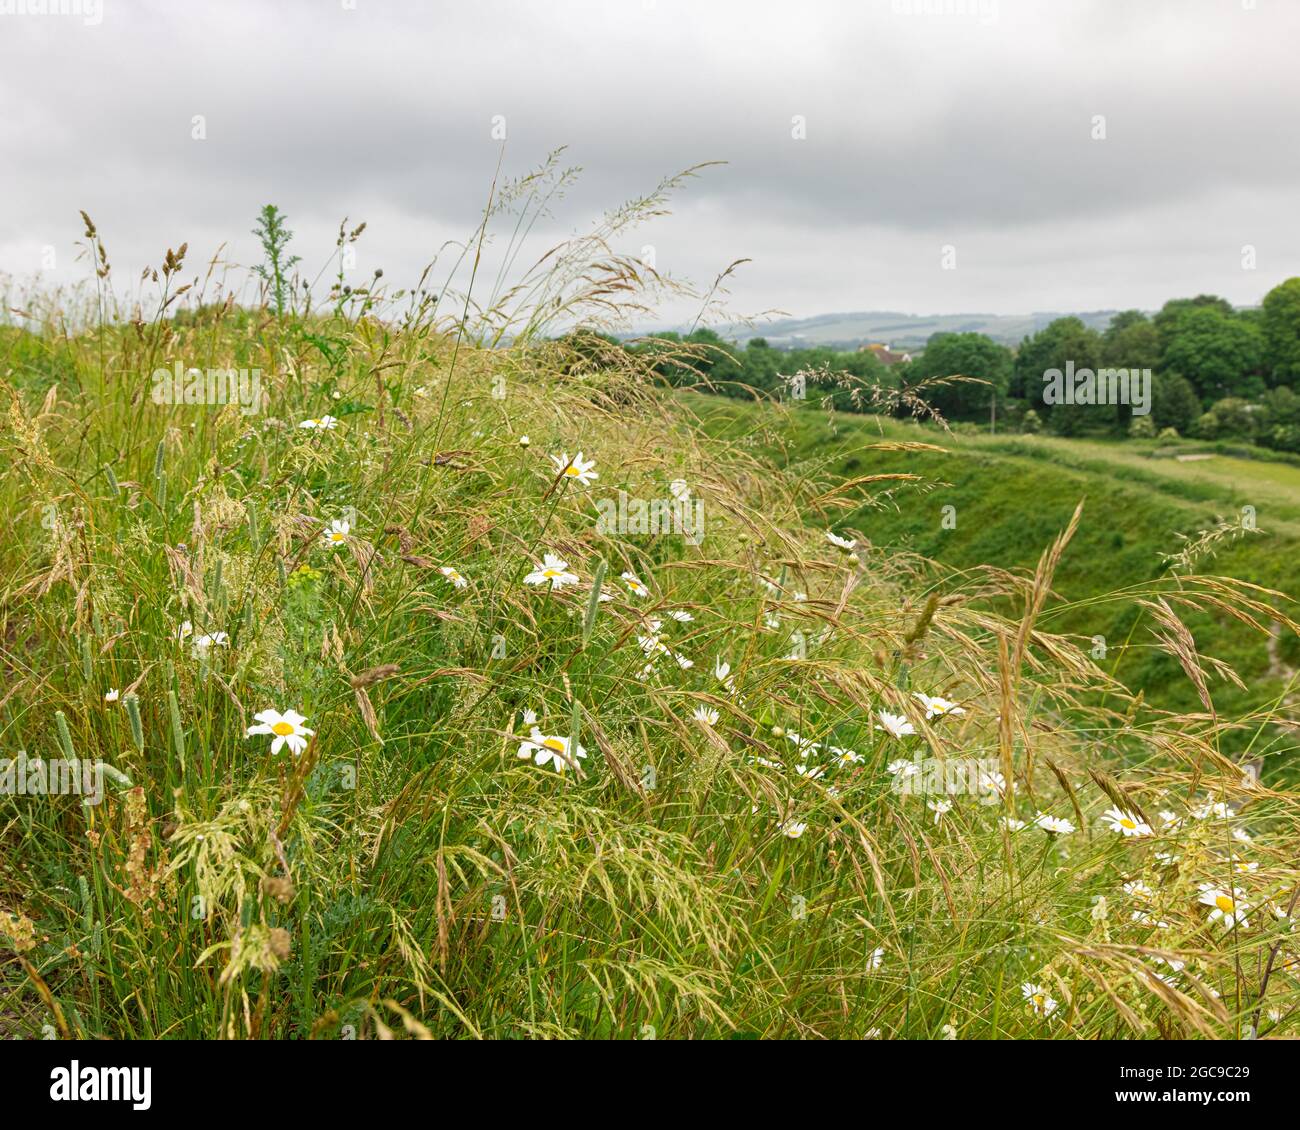 Salisbury, Wiltshire, UK, June 20th 2021: Oxeye daisies growing in long wet grass under an overcast sky on an earthwork at the historic Old Sarum. Stock Photo